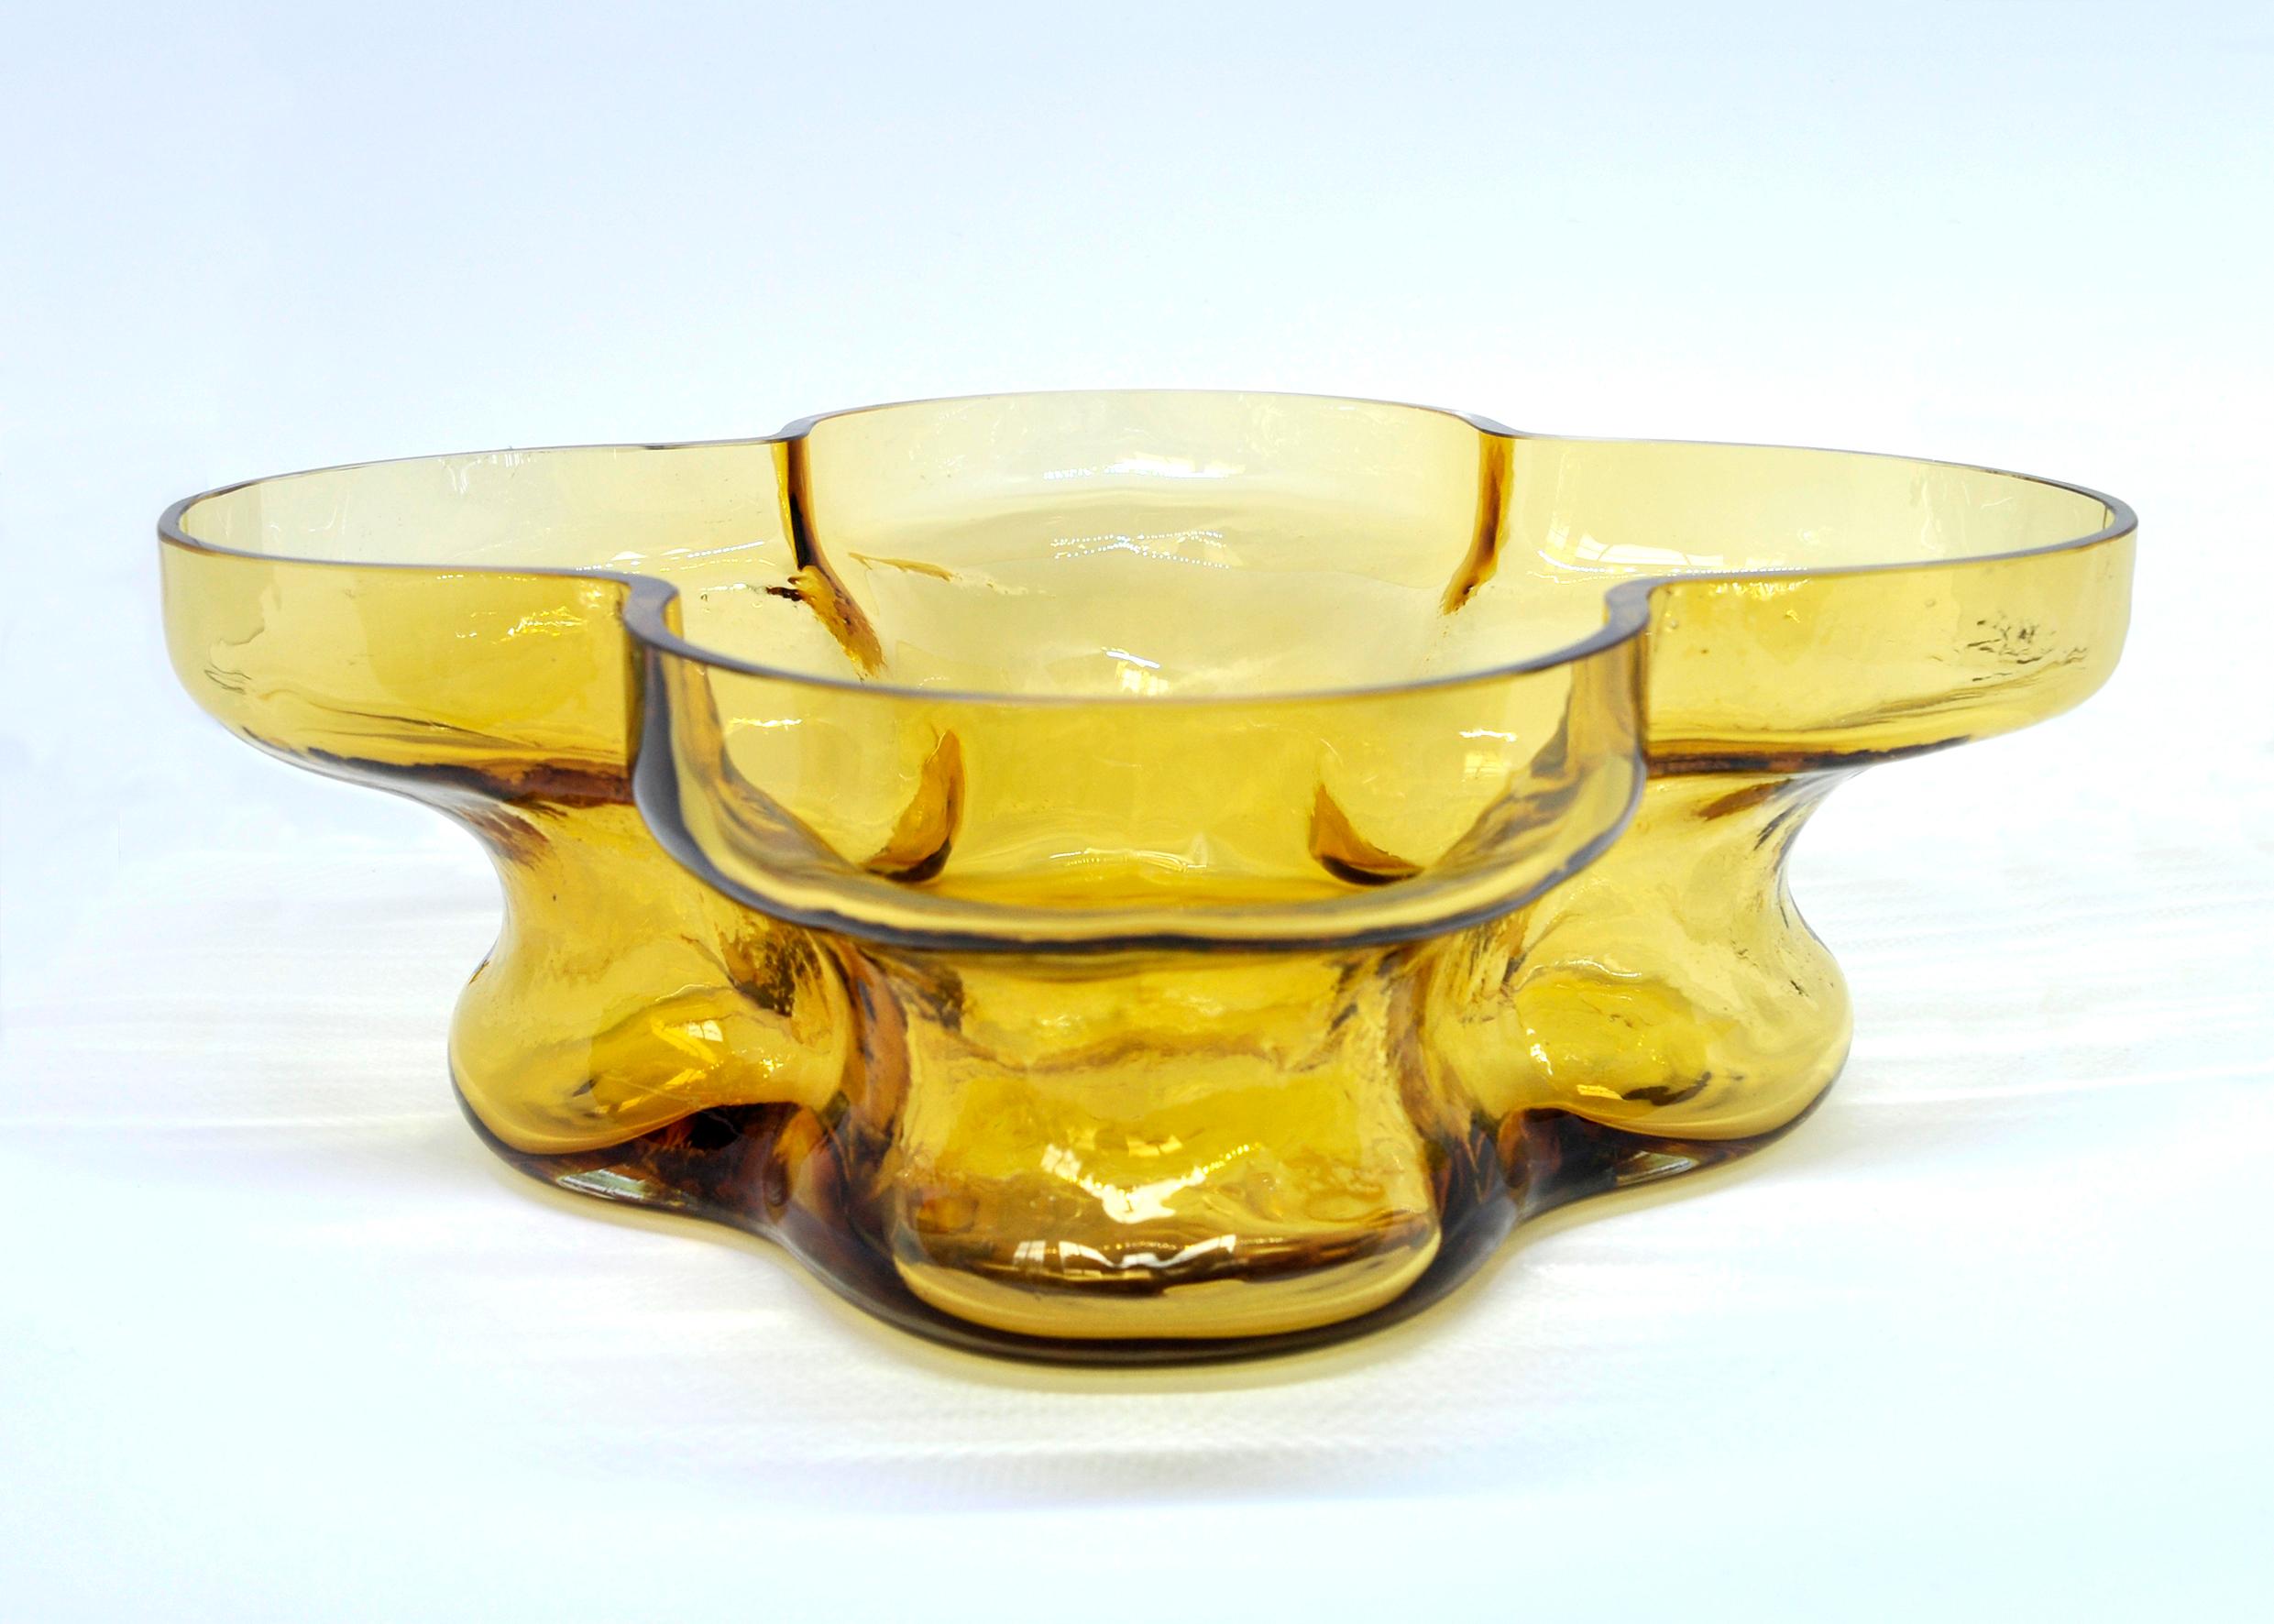 Unique amber large fruit bowl by Helena Tynell, Finland. In production: 1971-1976
Mint condition.